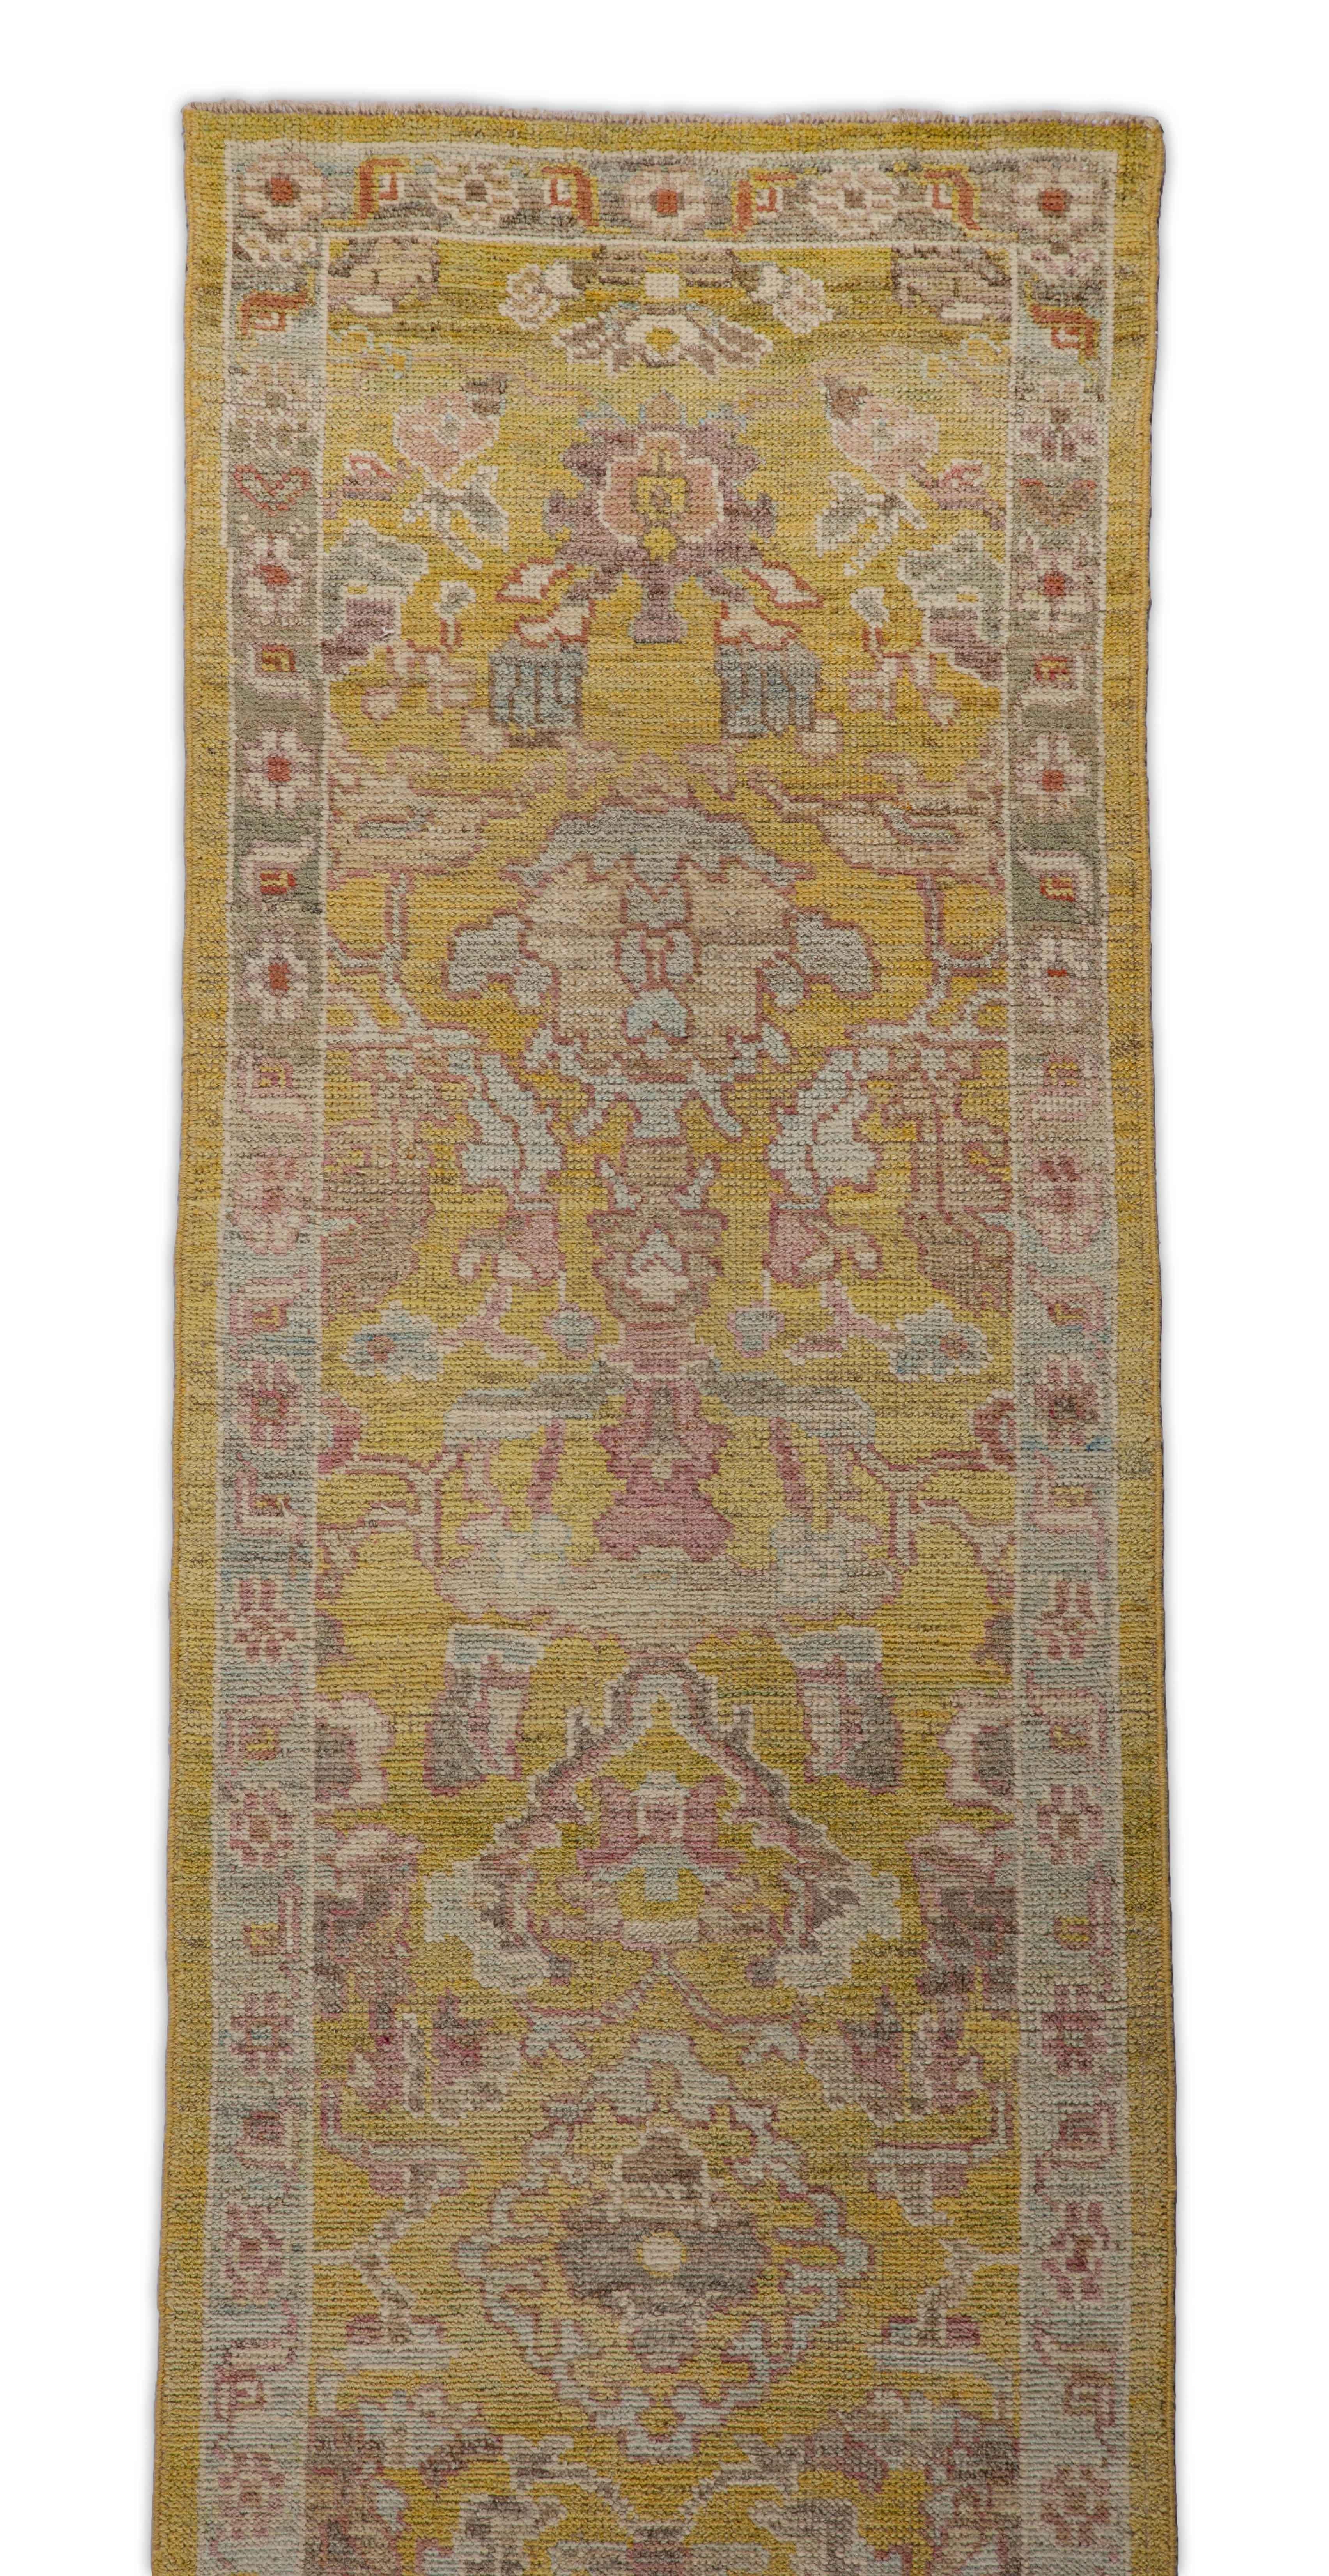 Wool Contemporary Oushak Runner Rug from Turkey with Gold and Pink Floral Patterns For Sale